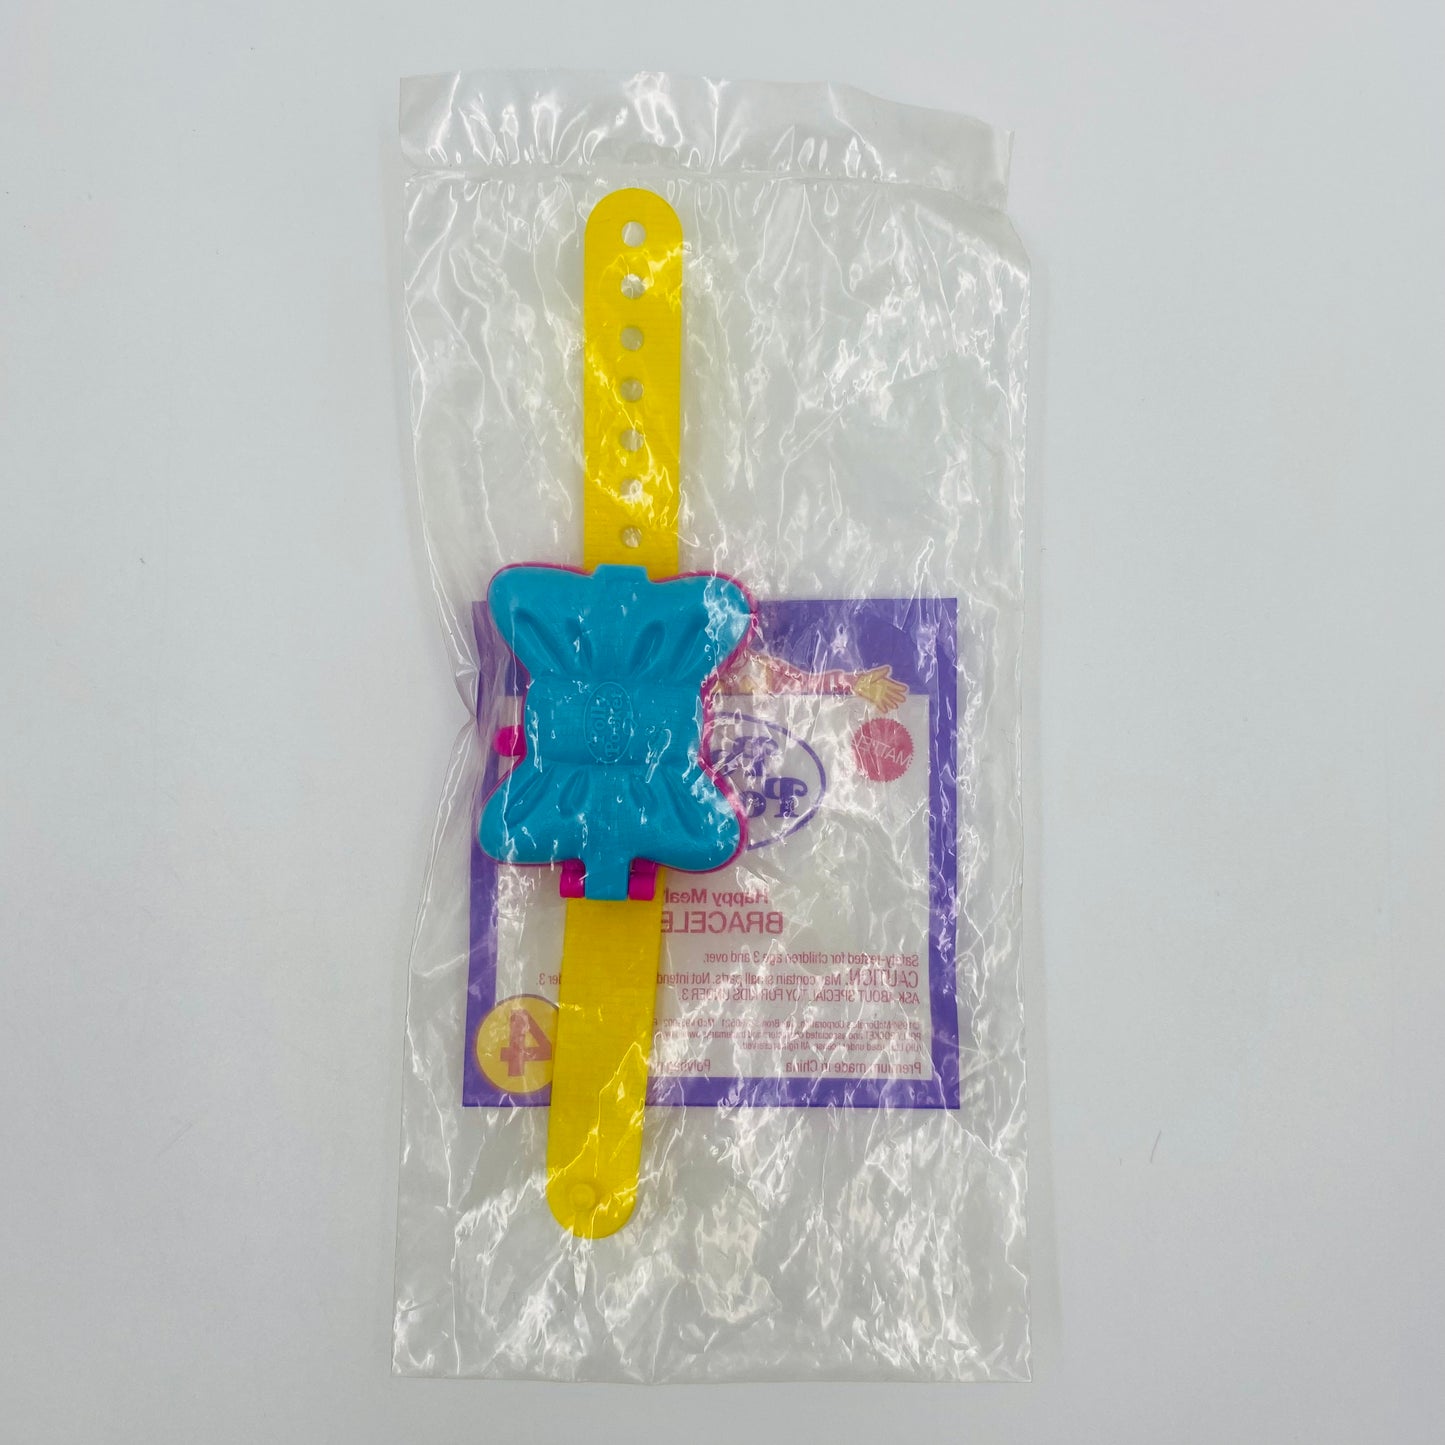 Polly Pocket Bracelet McDonald's Happy Meal toy (1994) bagged